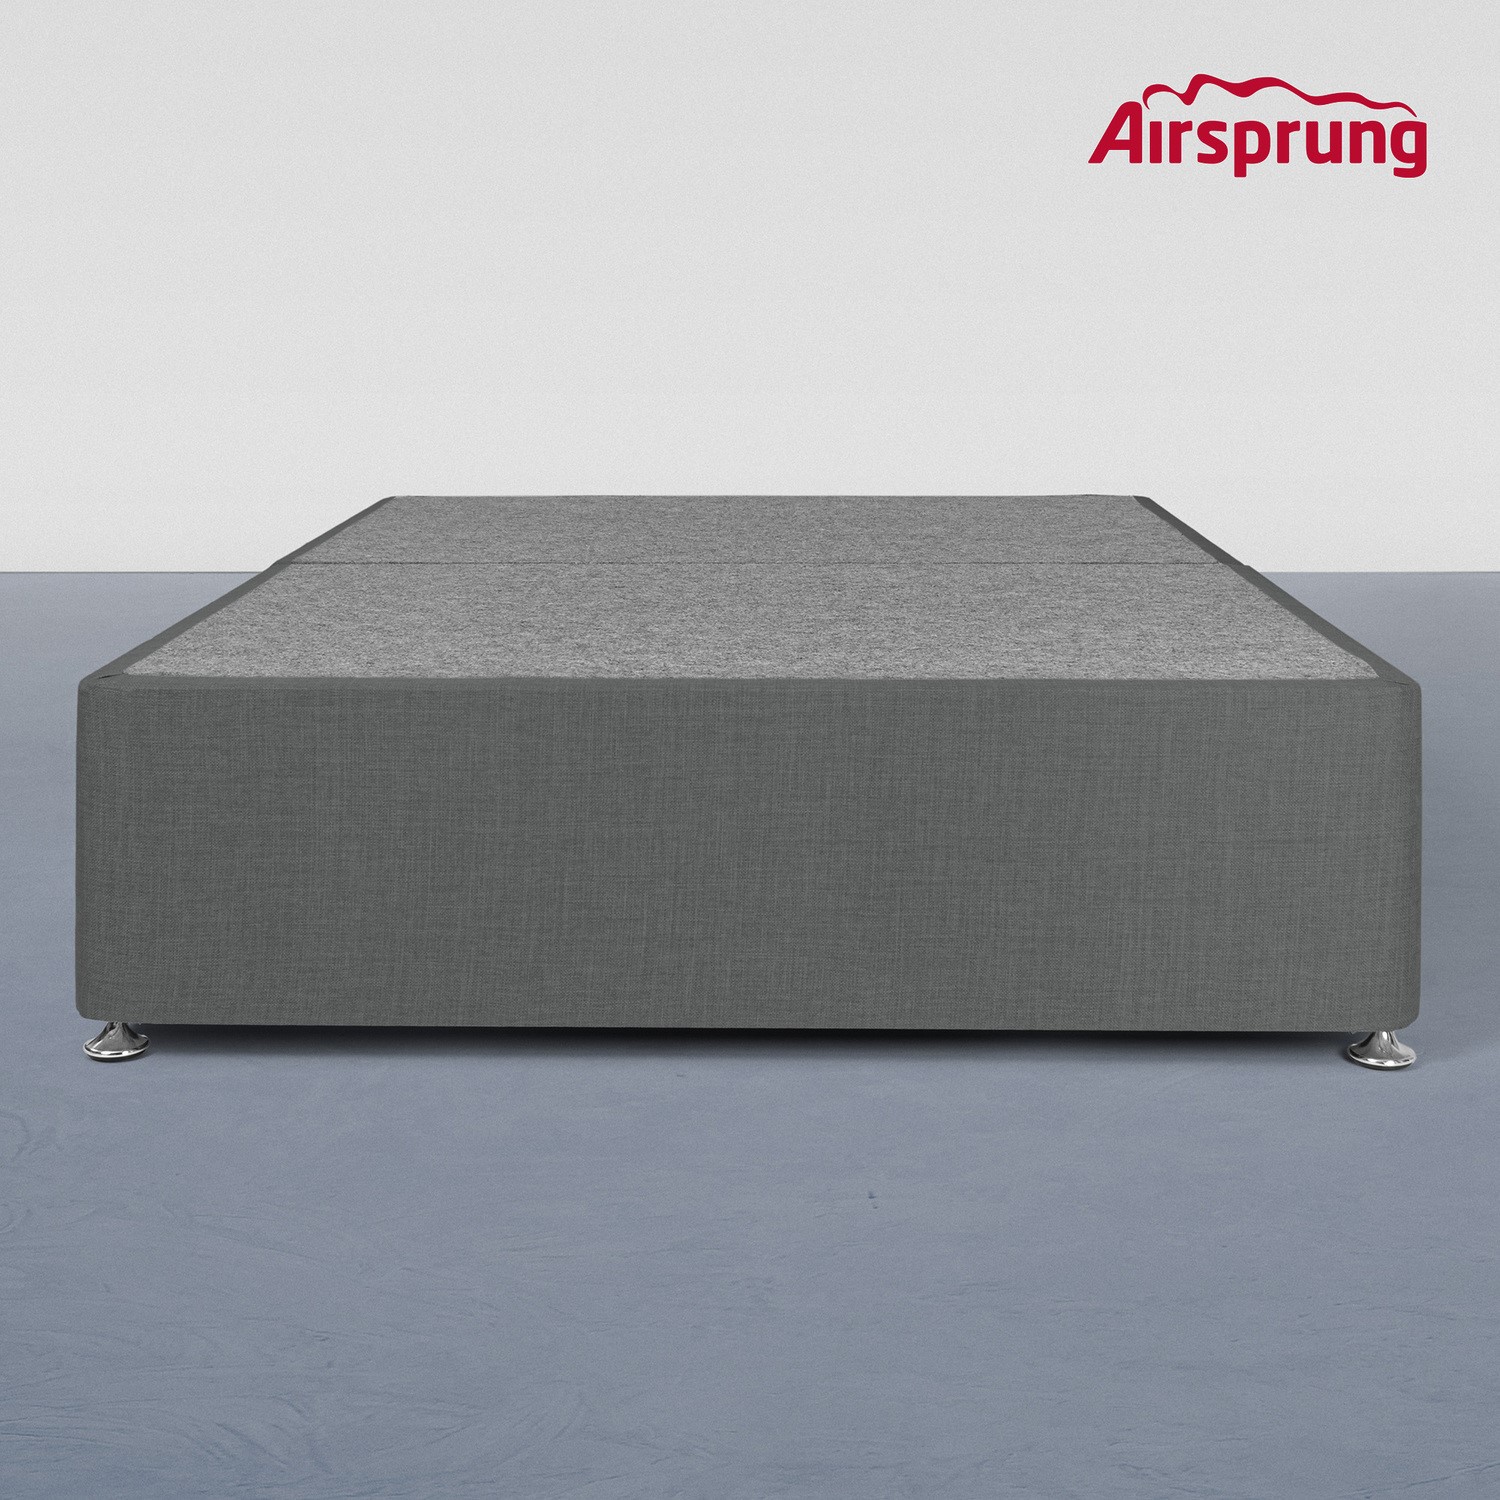 Read more about Airsprung kelston double 4 drawer divan charcoal